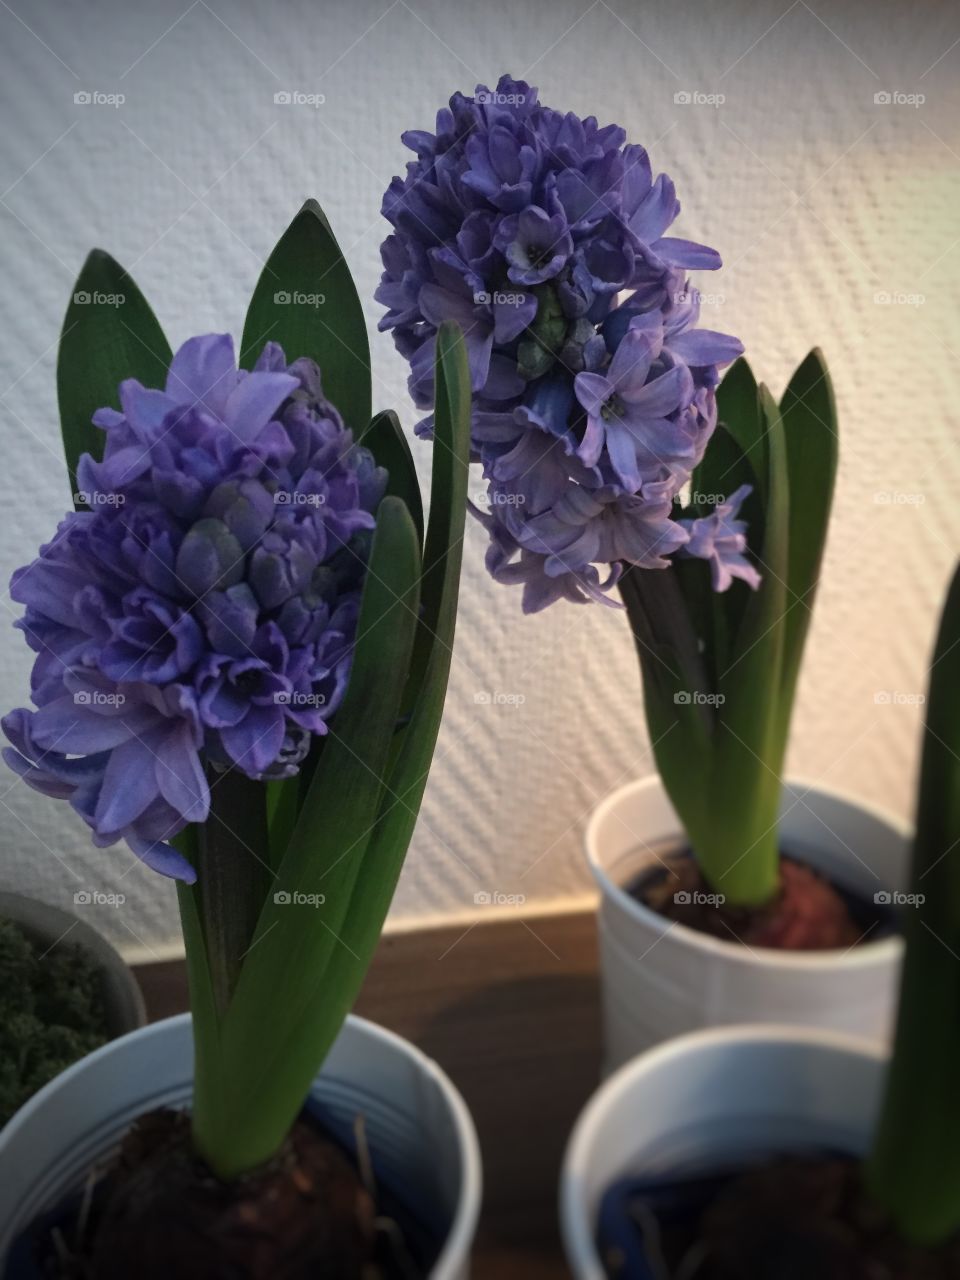 Potted plants of a hyacinths